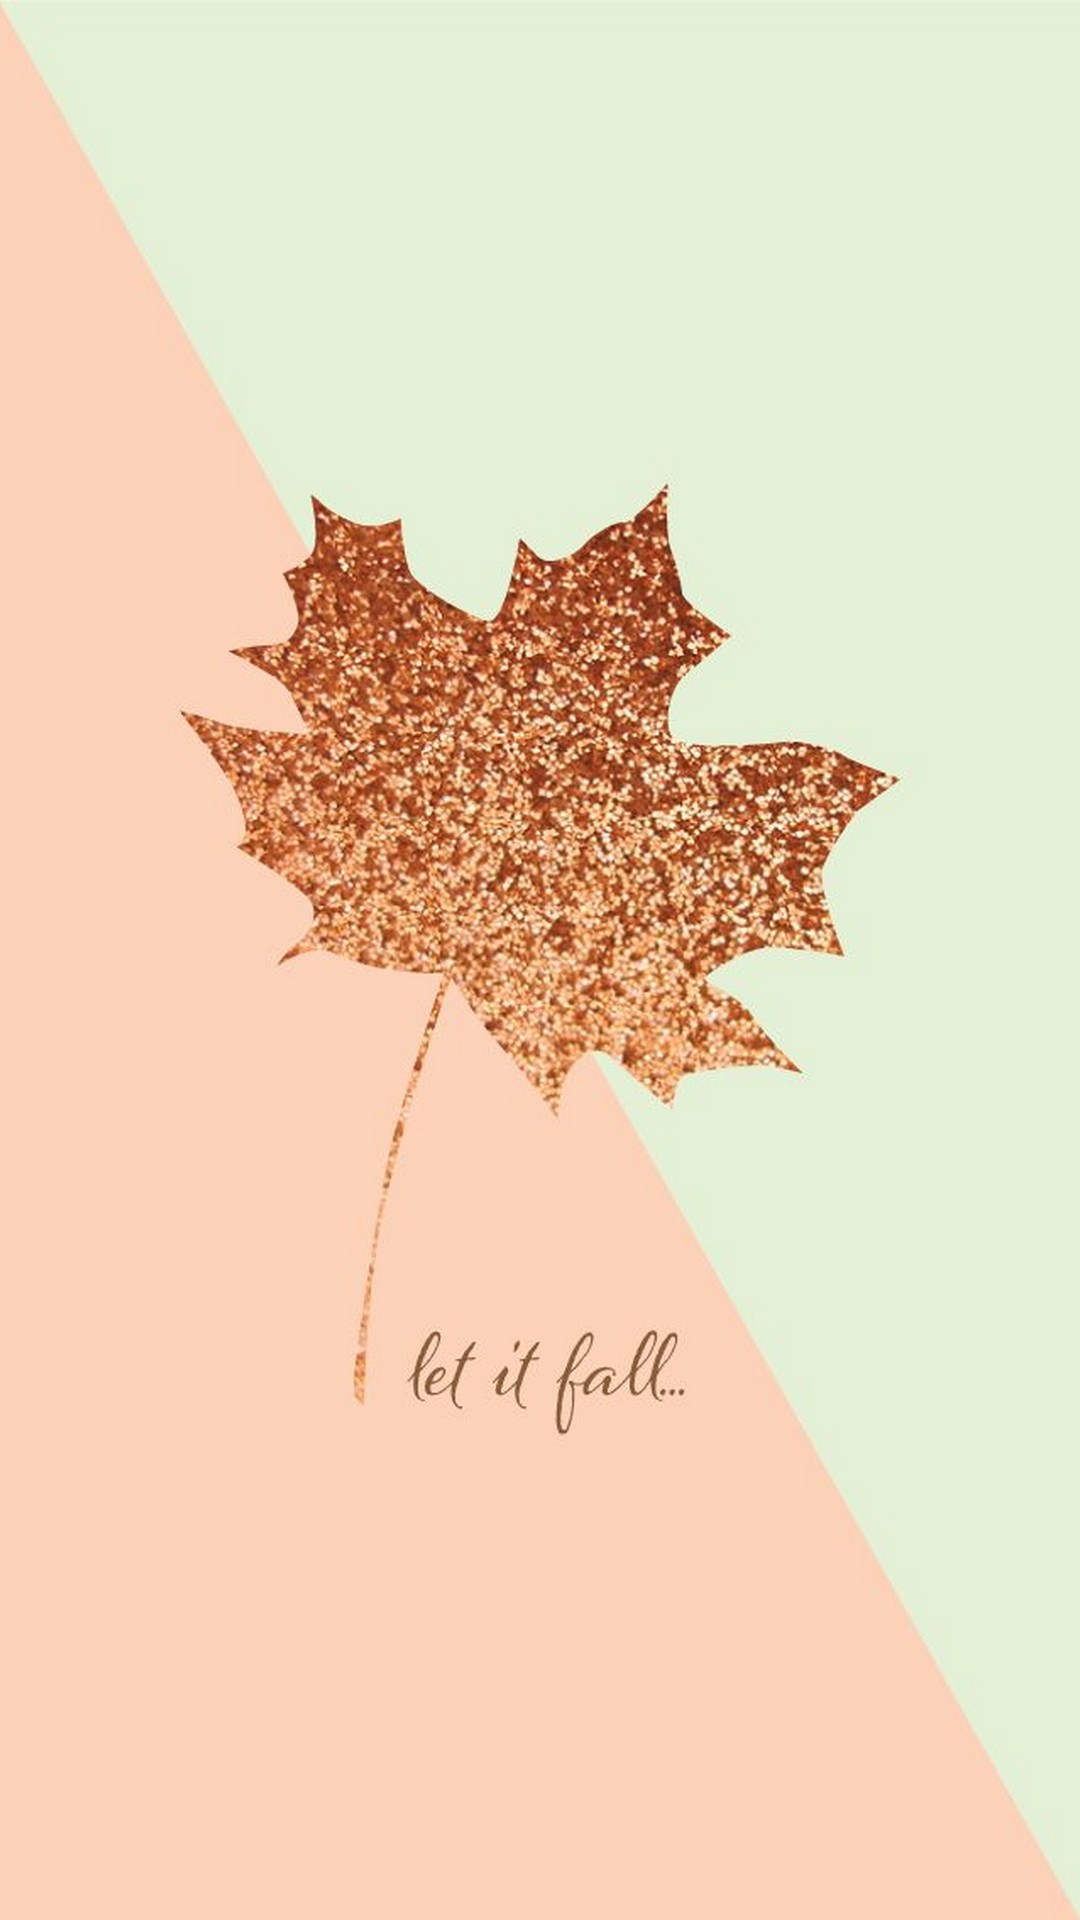 95 Aesthetic Fall wallpapers for iPhone (free to download) - miss mv